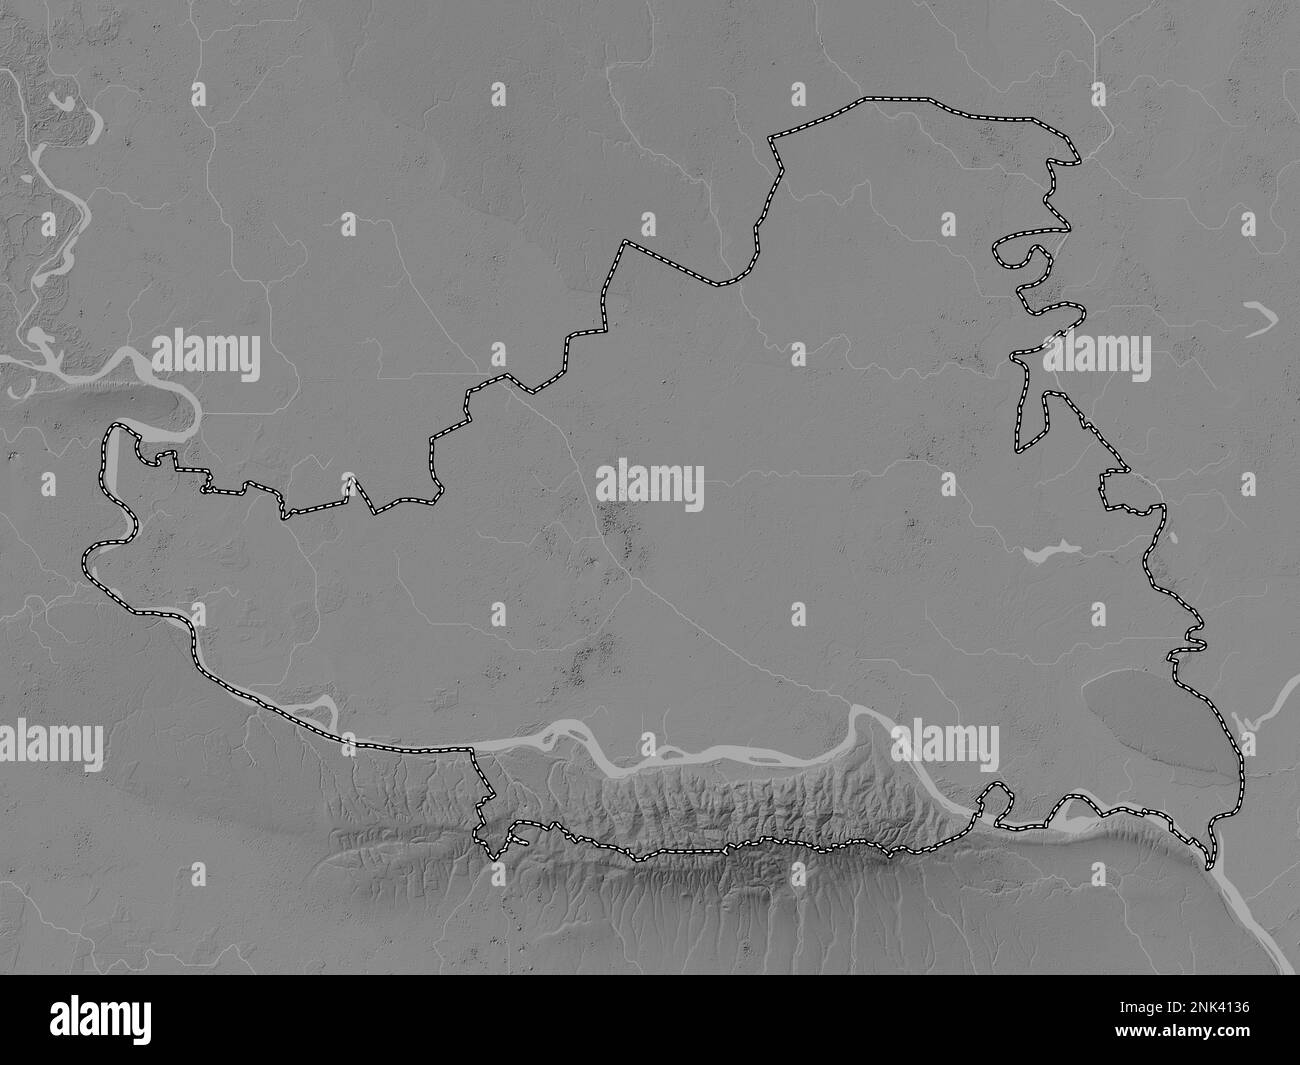 Juzno-Backi, district of Serbia. Grayscale elevation map with lakes and rivers Stock Photo